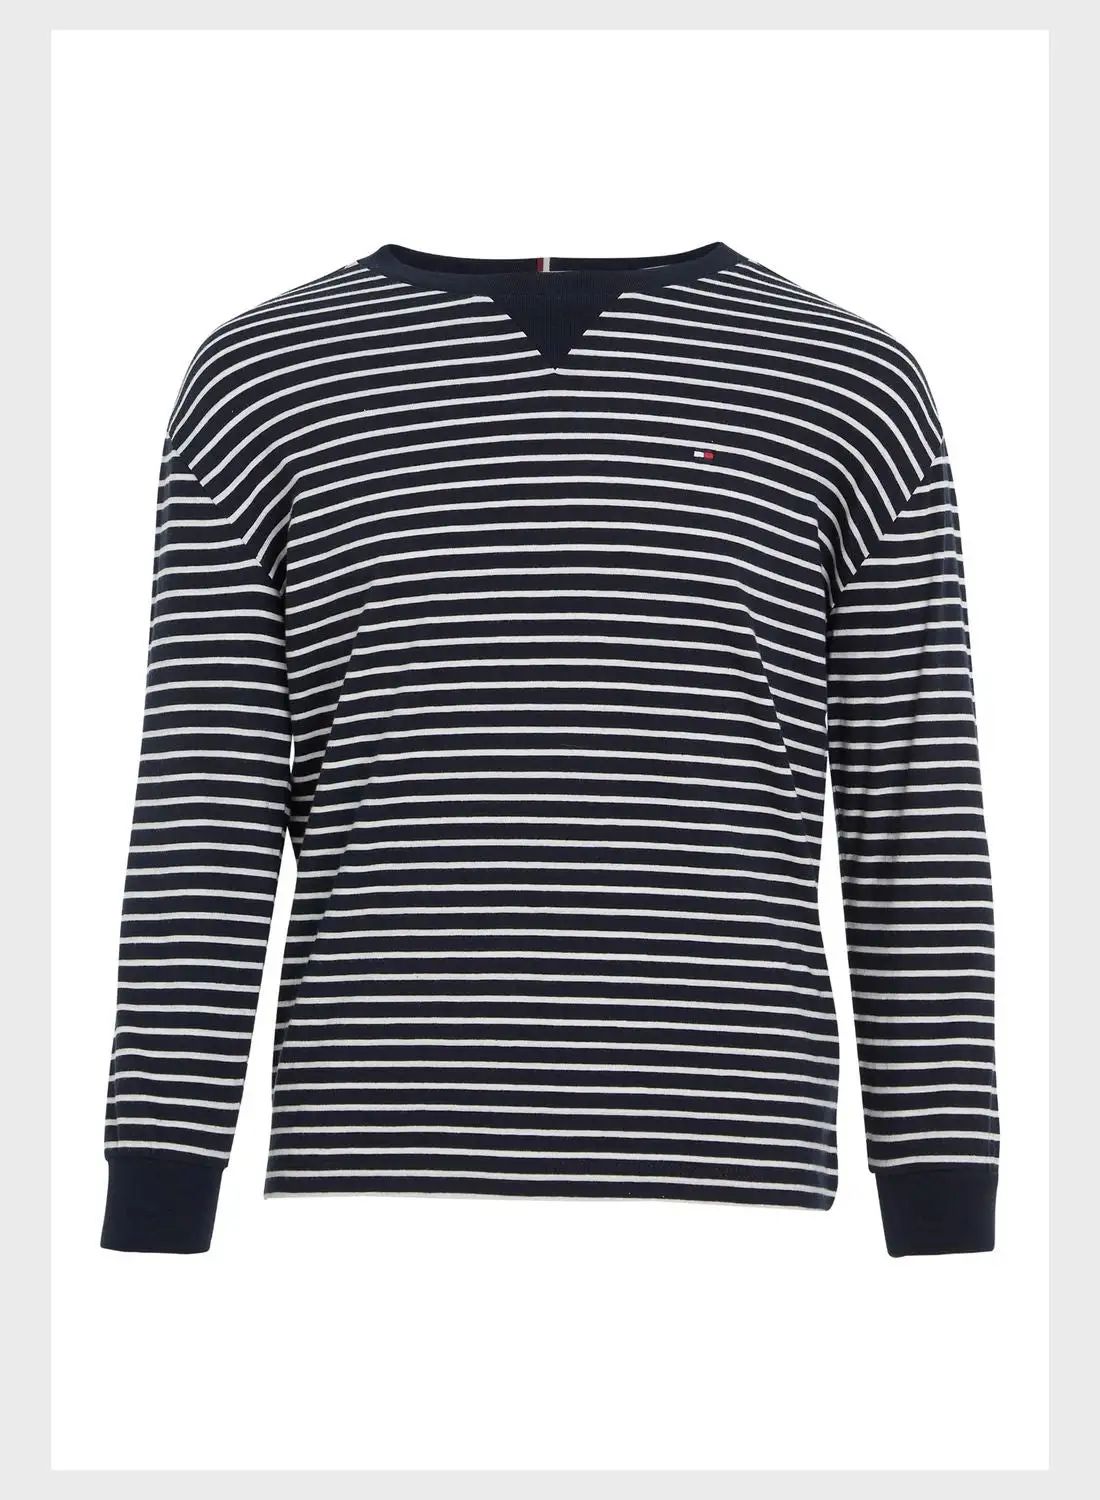 TOMMY HILFIGER Youth Striped T-Shirt